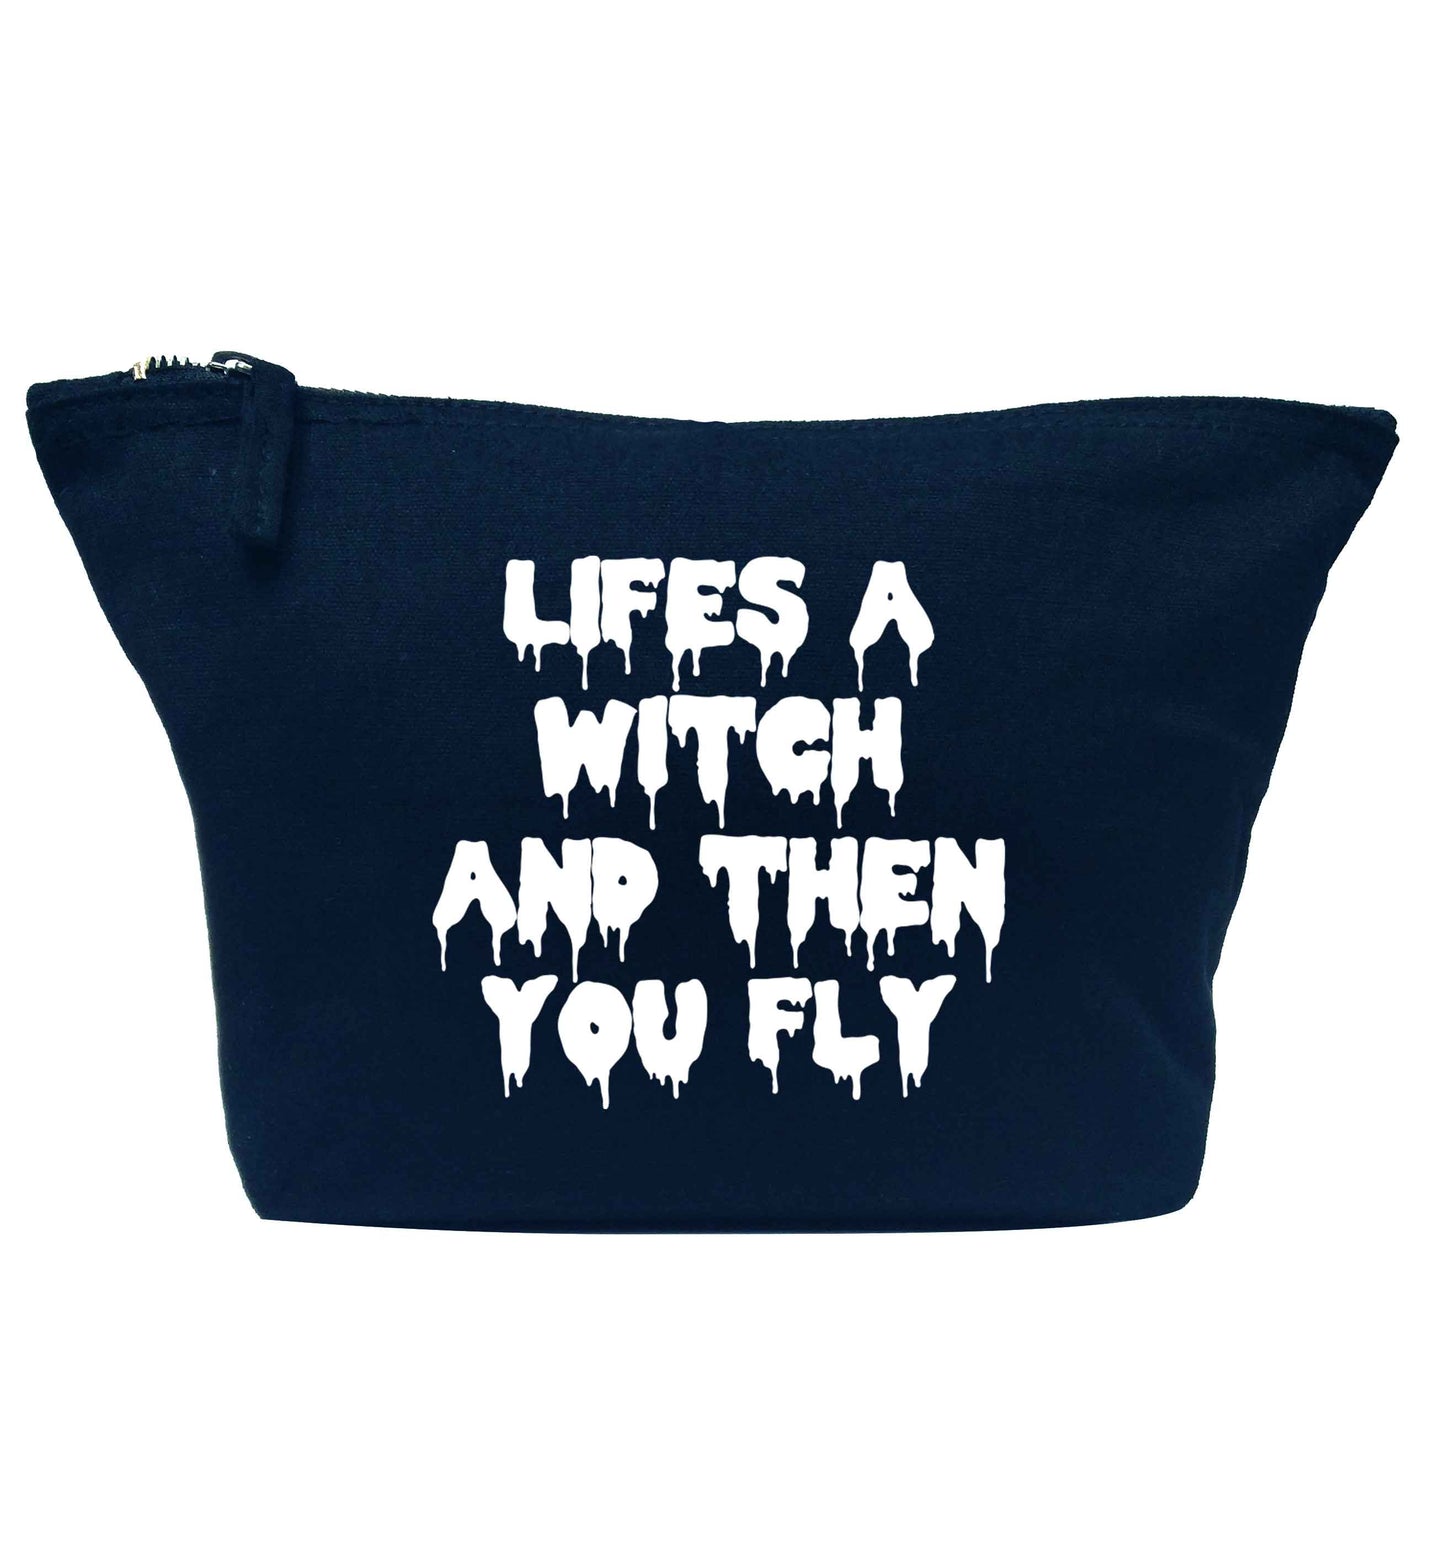 Life's a witch and then you fly navy makeup bag